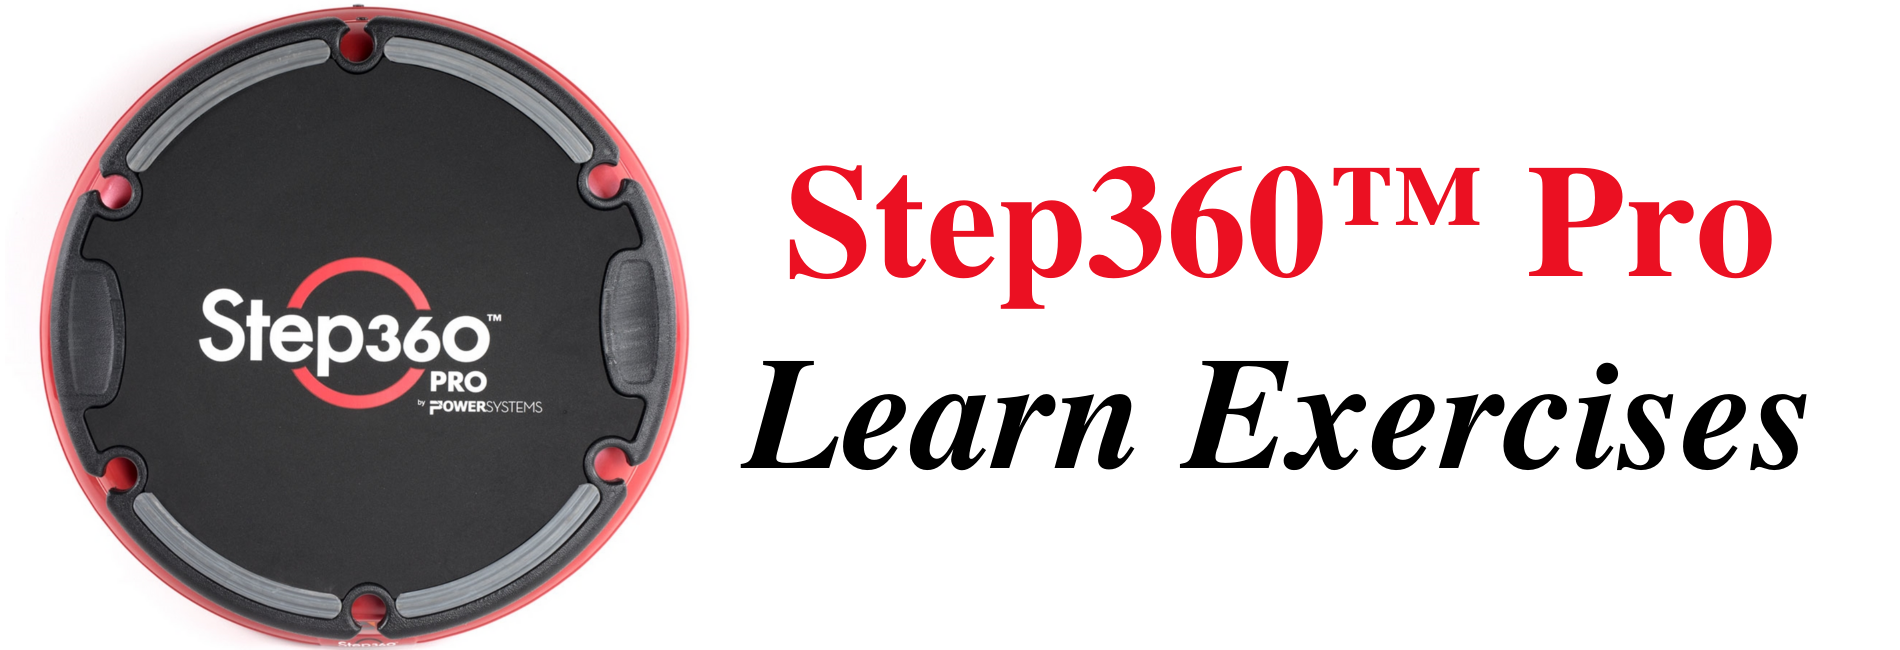 Step360 Pro Learn Exercises